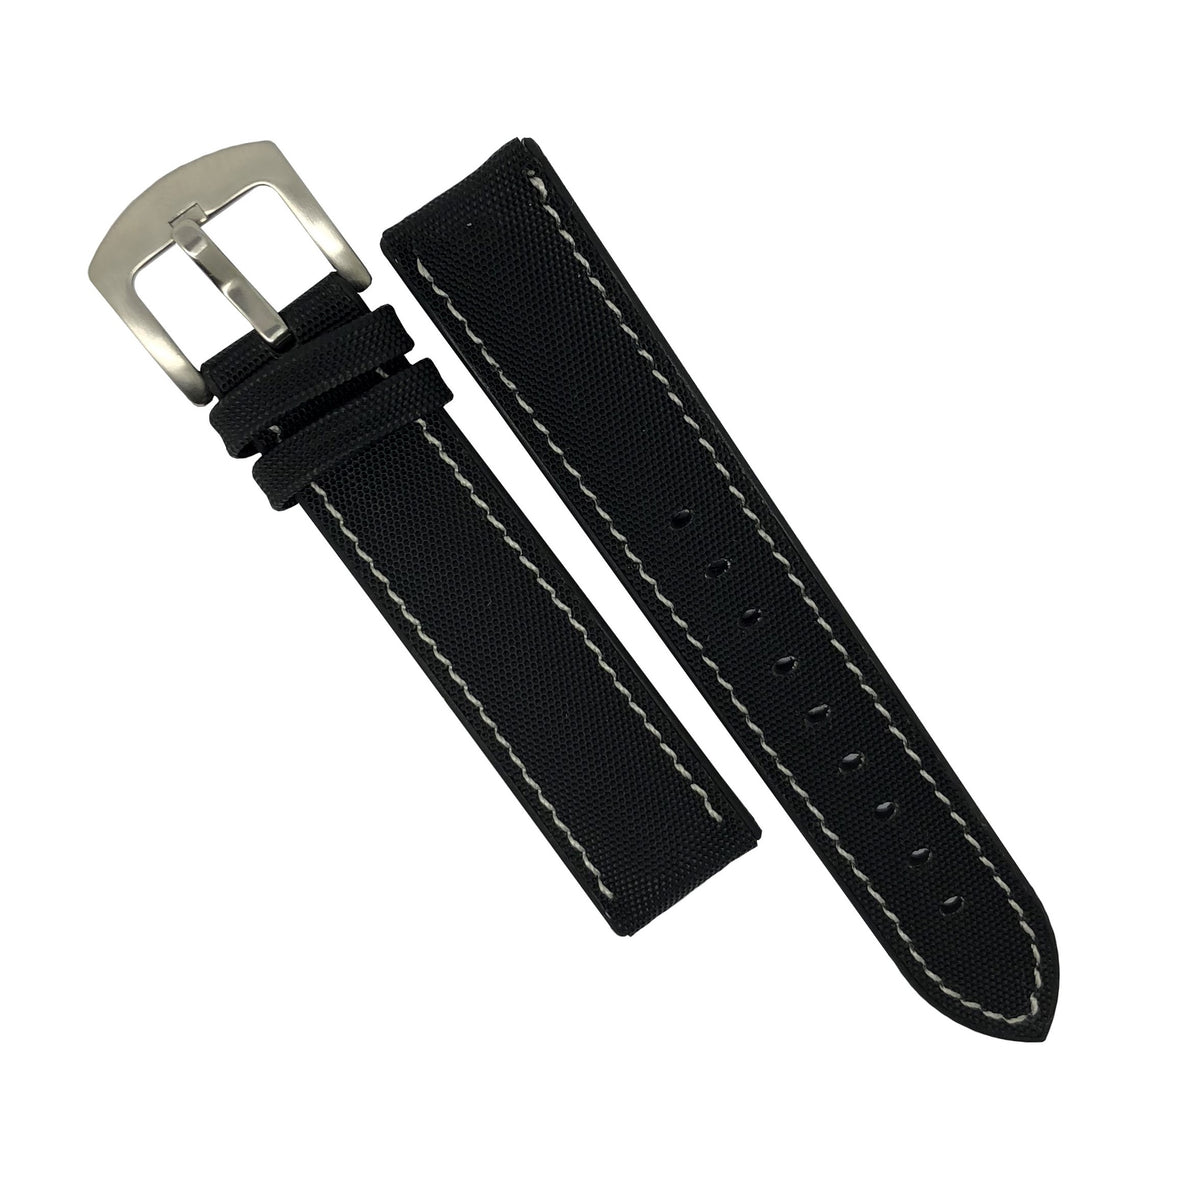 Performax N1 Hybrid Strap in Black with White Stitching (20mm) - Nomad Watch Works Malaysia